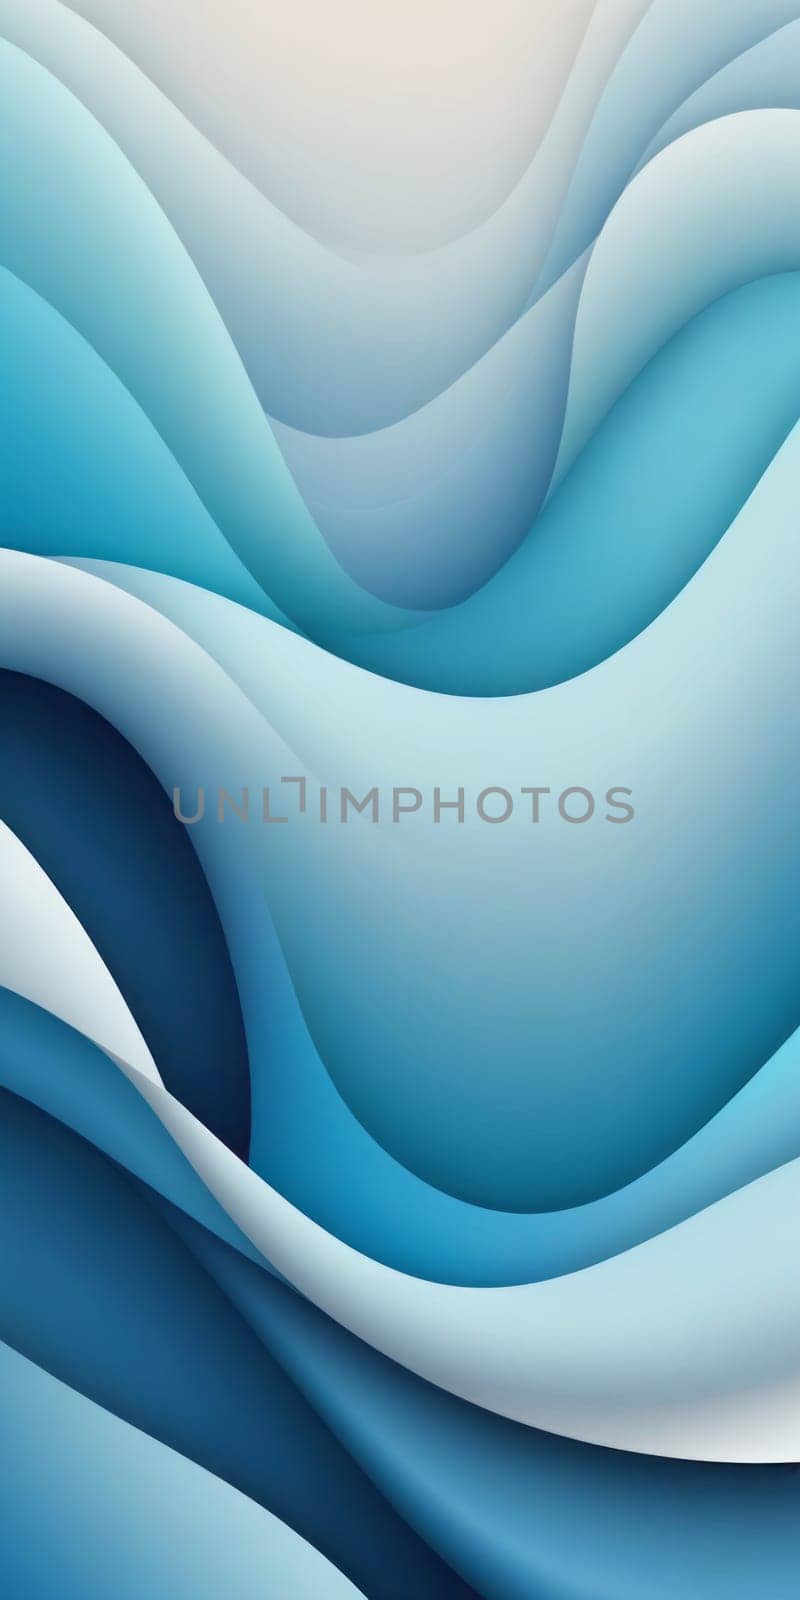 Organic Shapes in Silver and Blue by nkotlyar